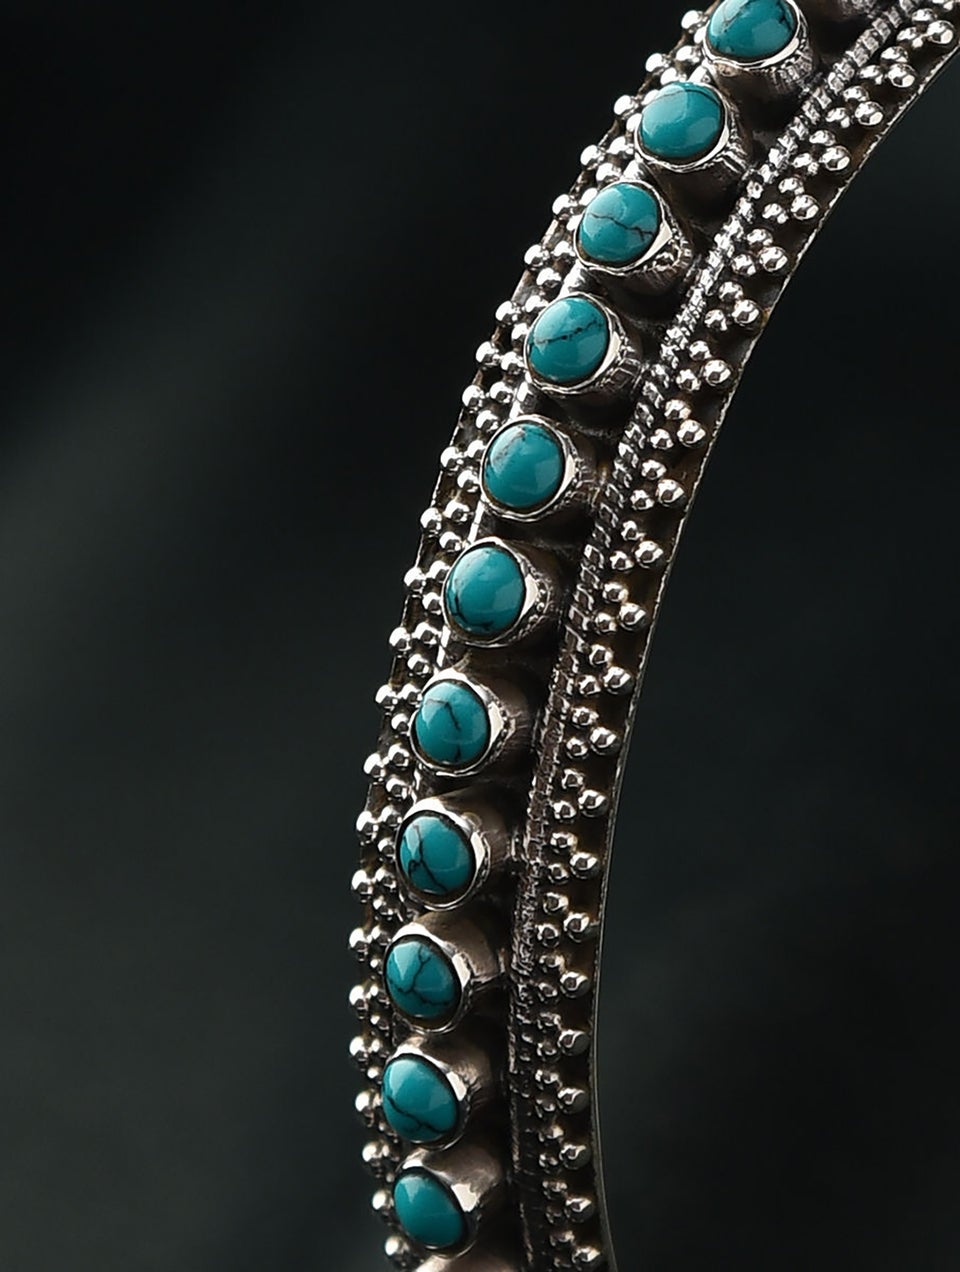 Women Tribal Silver Bangle with Turquoise